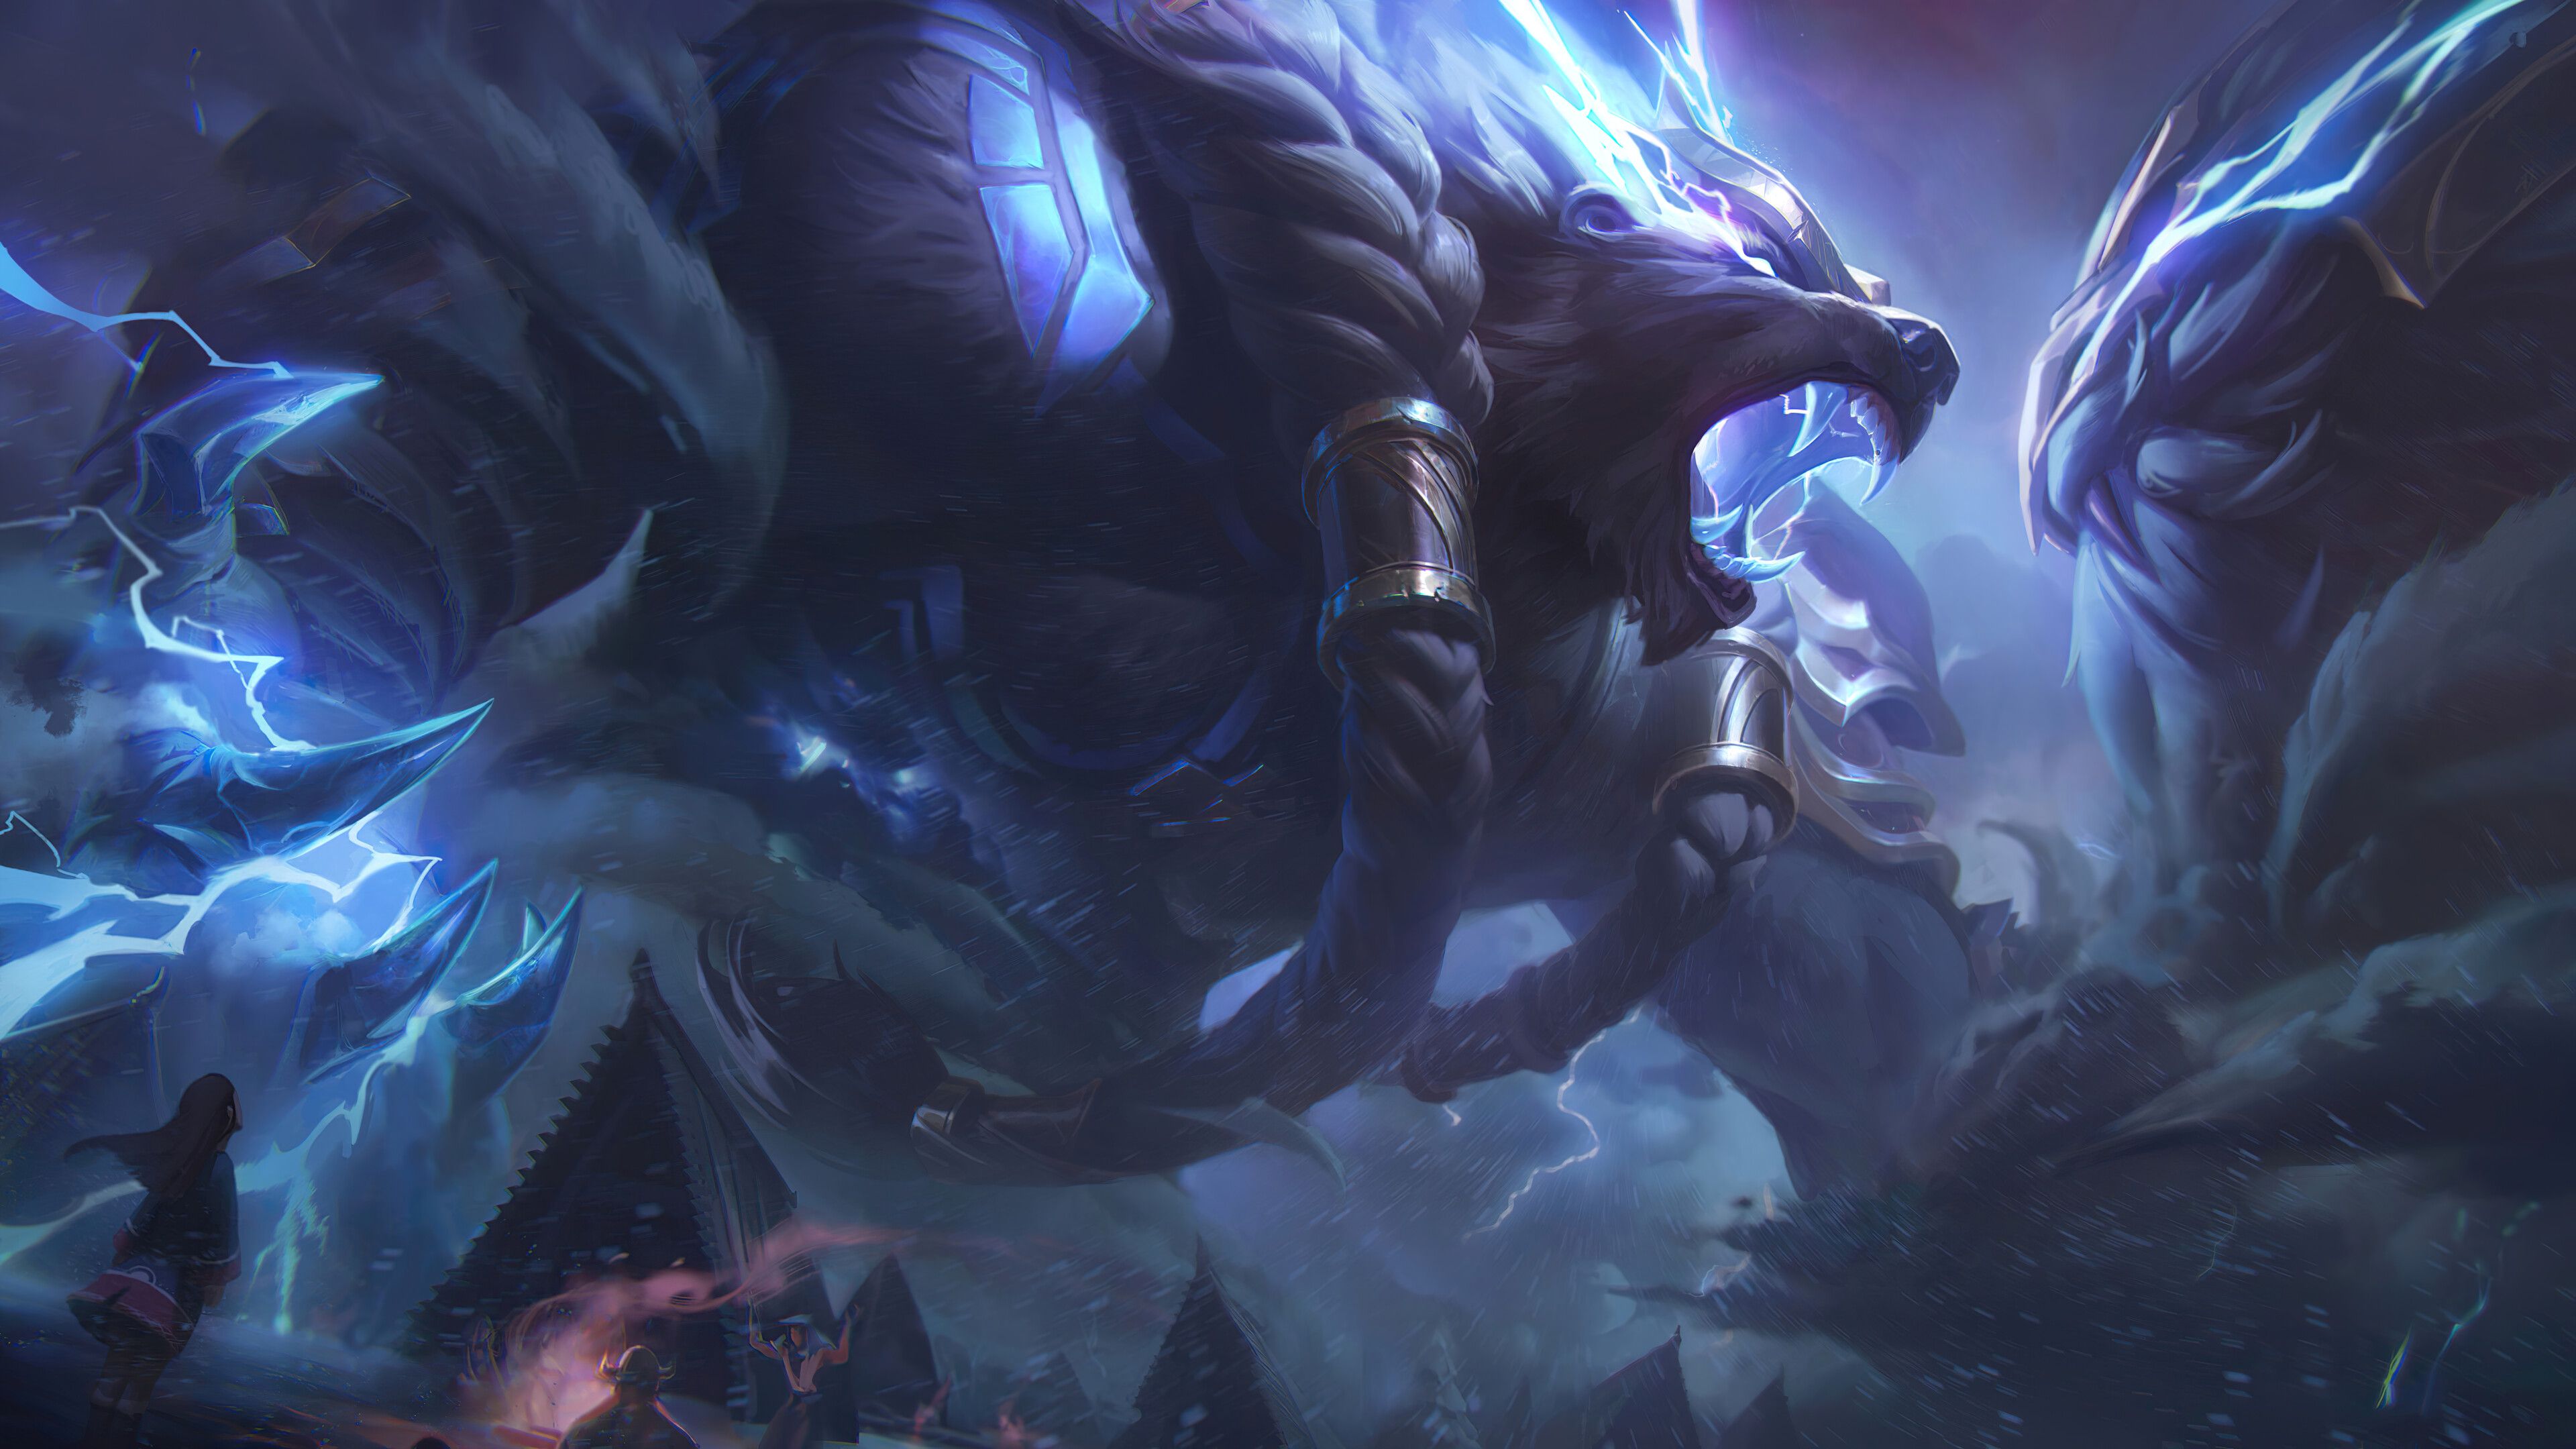 League of Legends Champions - LoLWallpapers